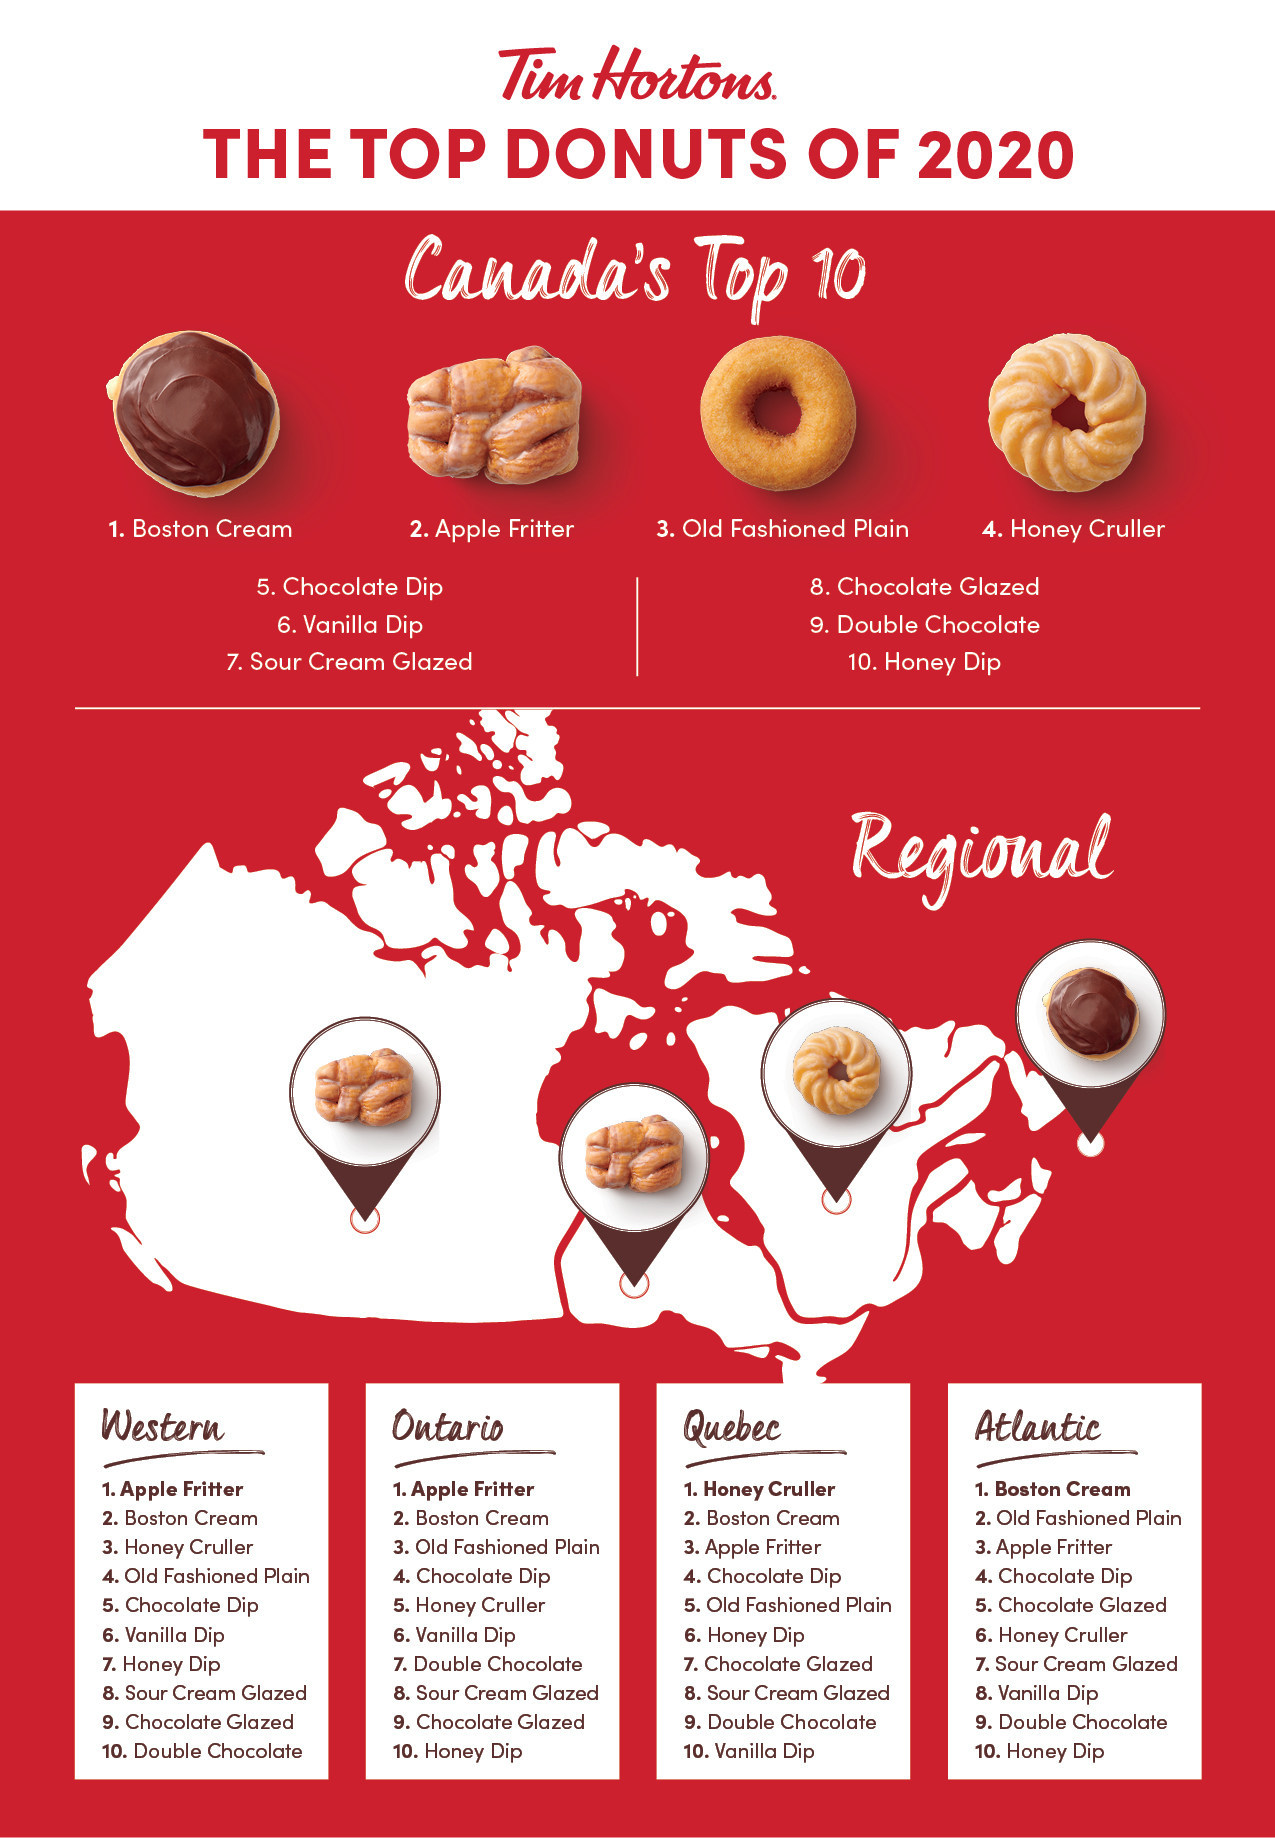 These are the top Tim Hortons donut and coffee orders of 2020